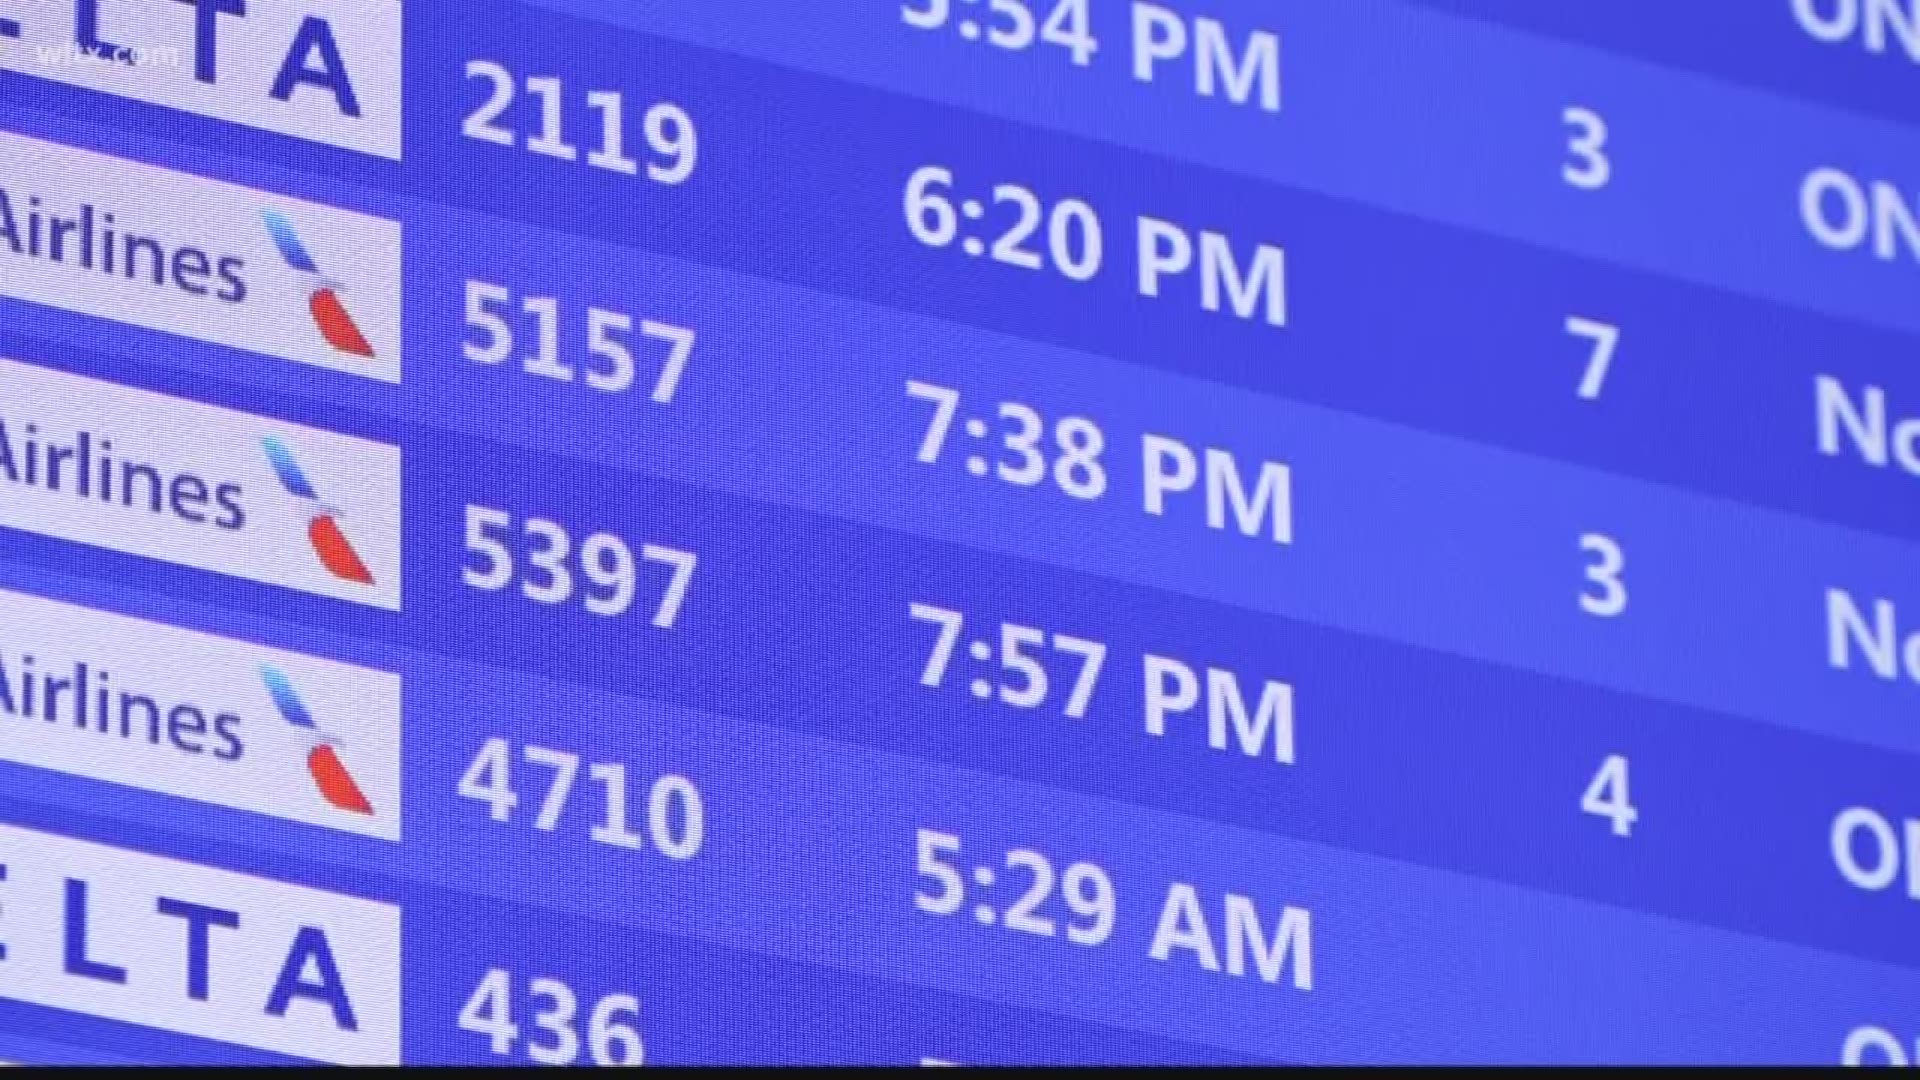 Columbia airport has begun to see holiday travelers and its only Tuesday